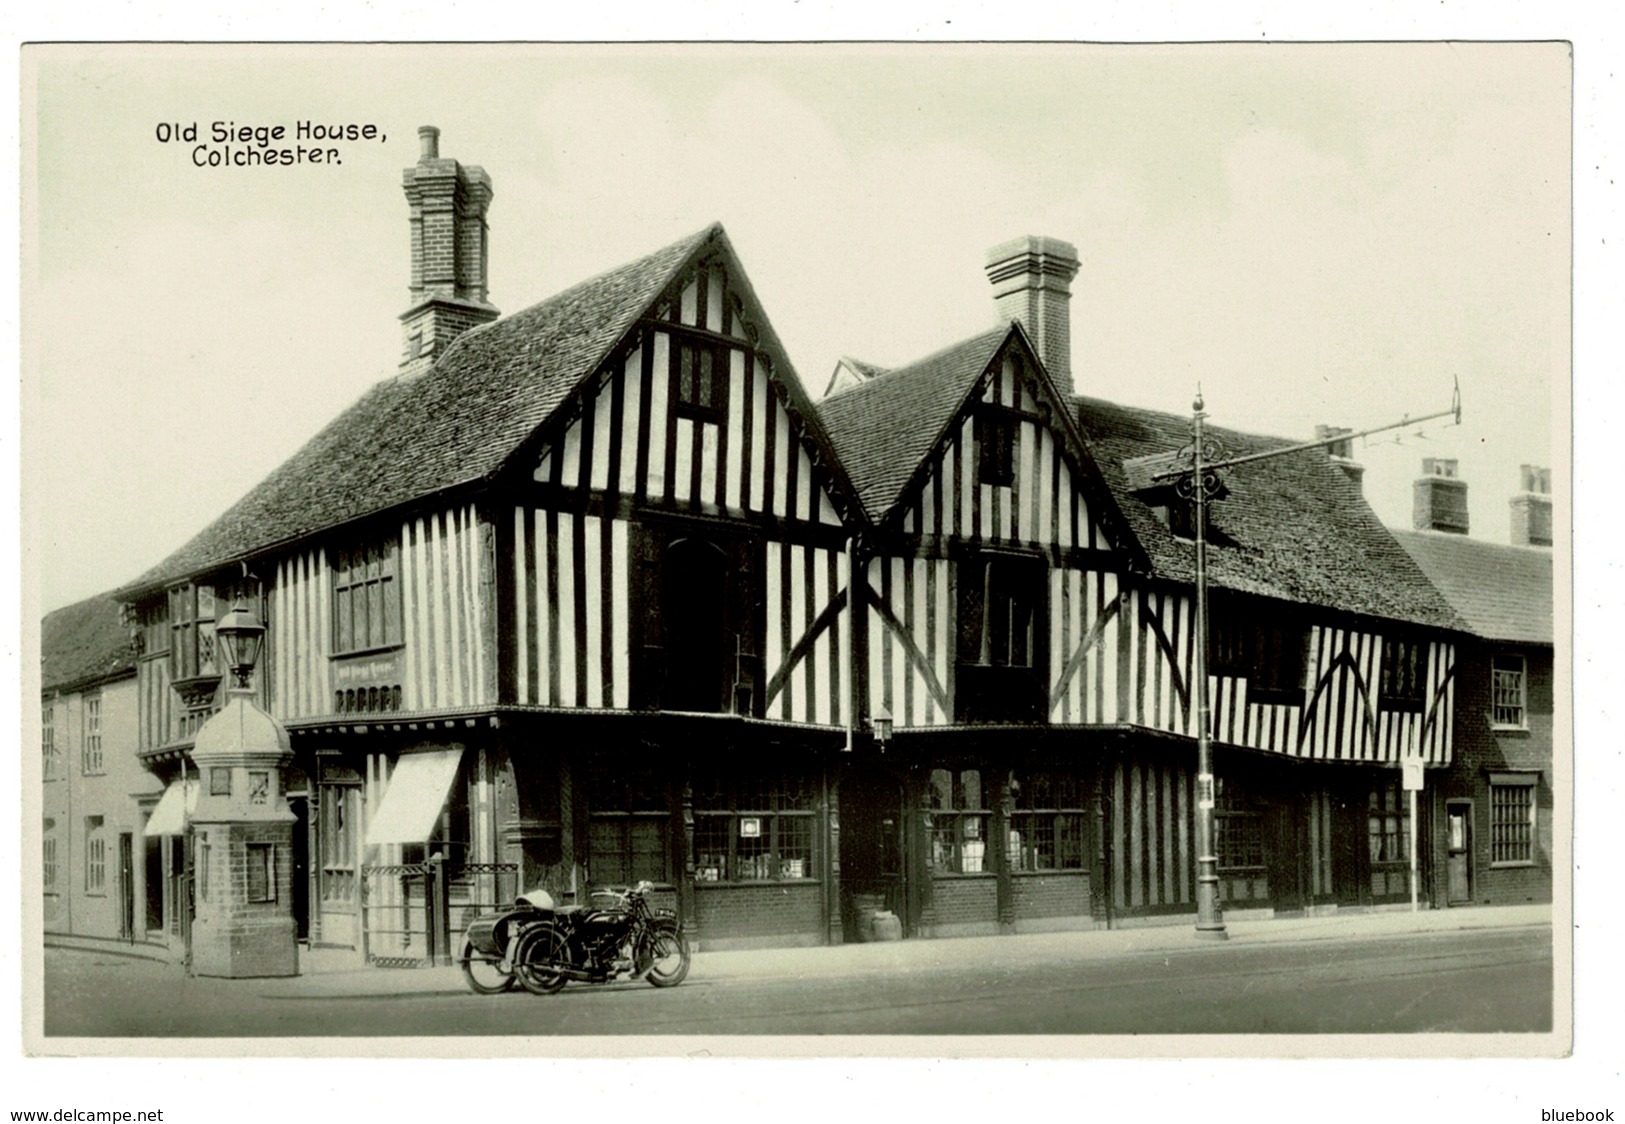 Ref 1348 - Early Real Photo Postcard - Motorcycle & Sidecar - Old Siege House Colchester - Colchester